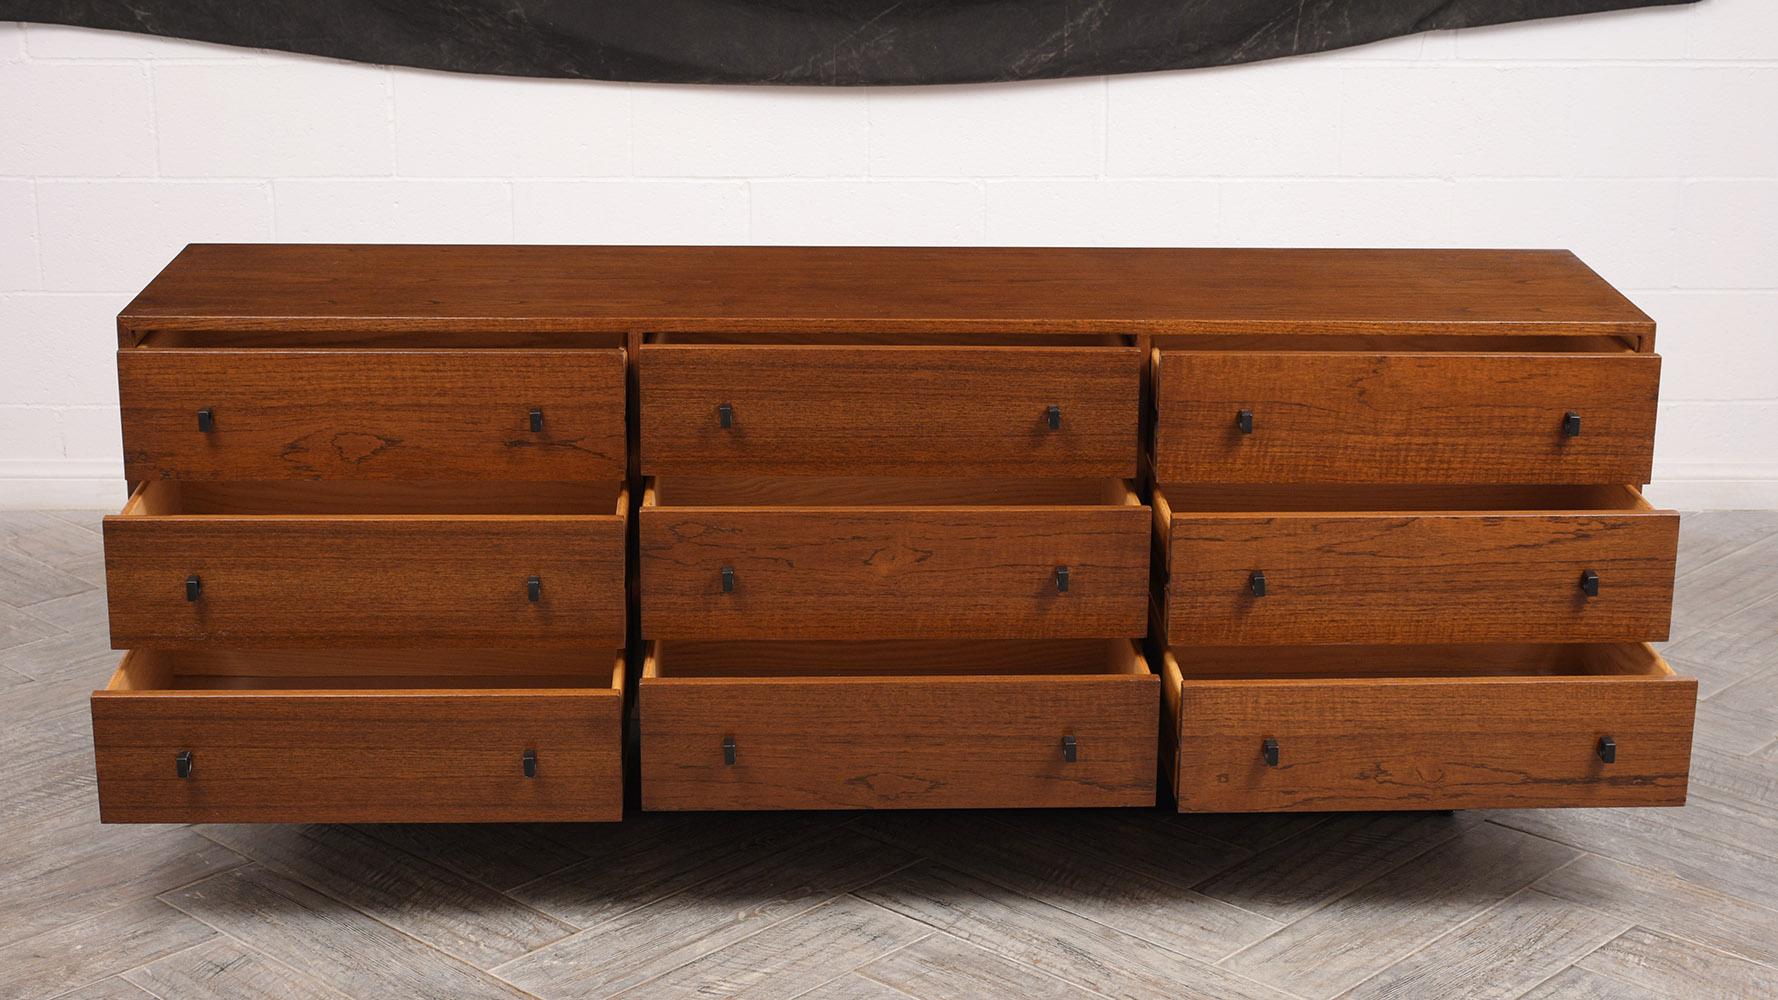 This is a lovely spacious nine-drawer dresser. The dresser has been completely restored. Solid walnut wood construction with its original walnut finish. Features nine drawers that open and close with ease with dual black brass design pulls. Finished